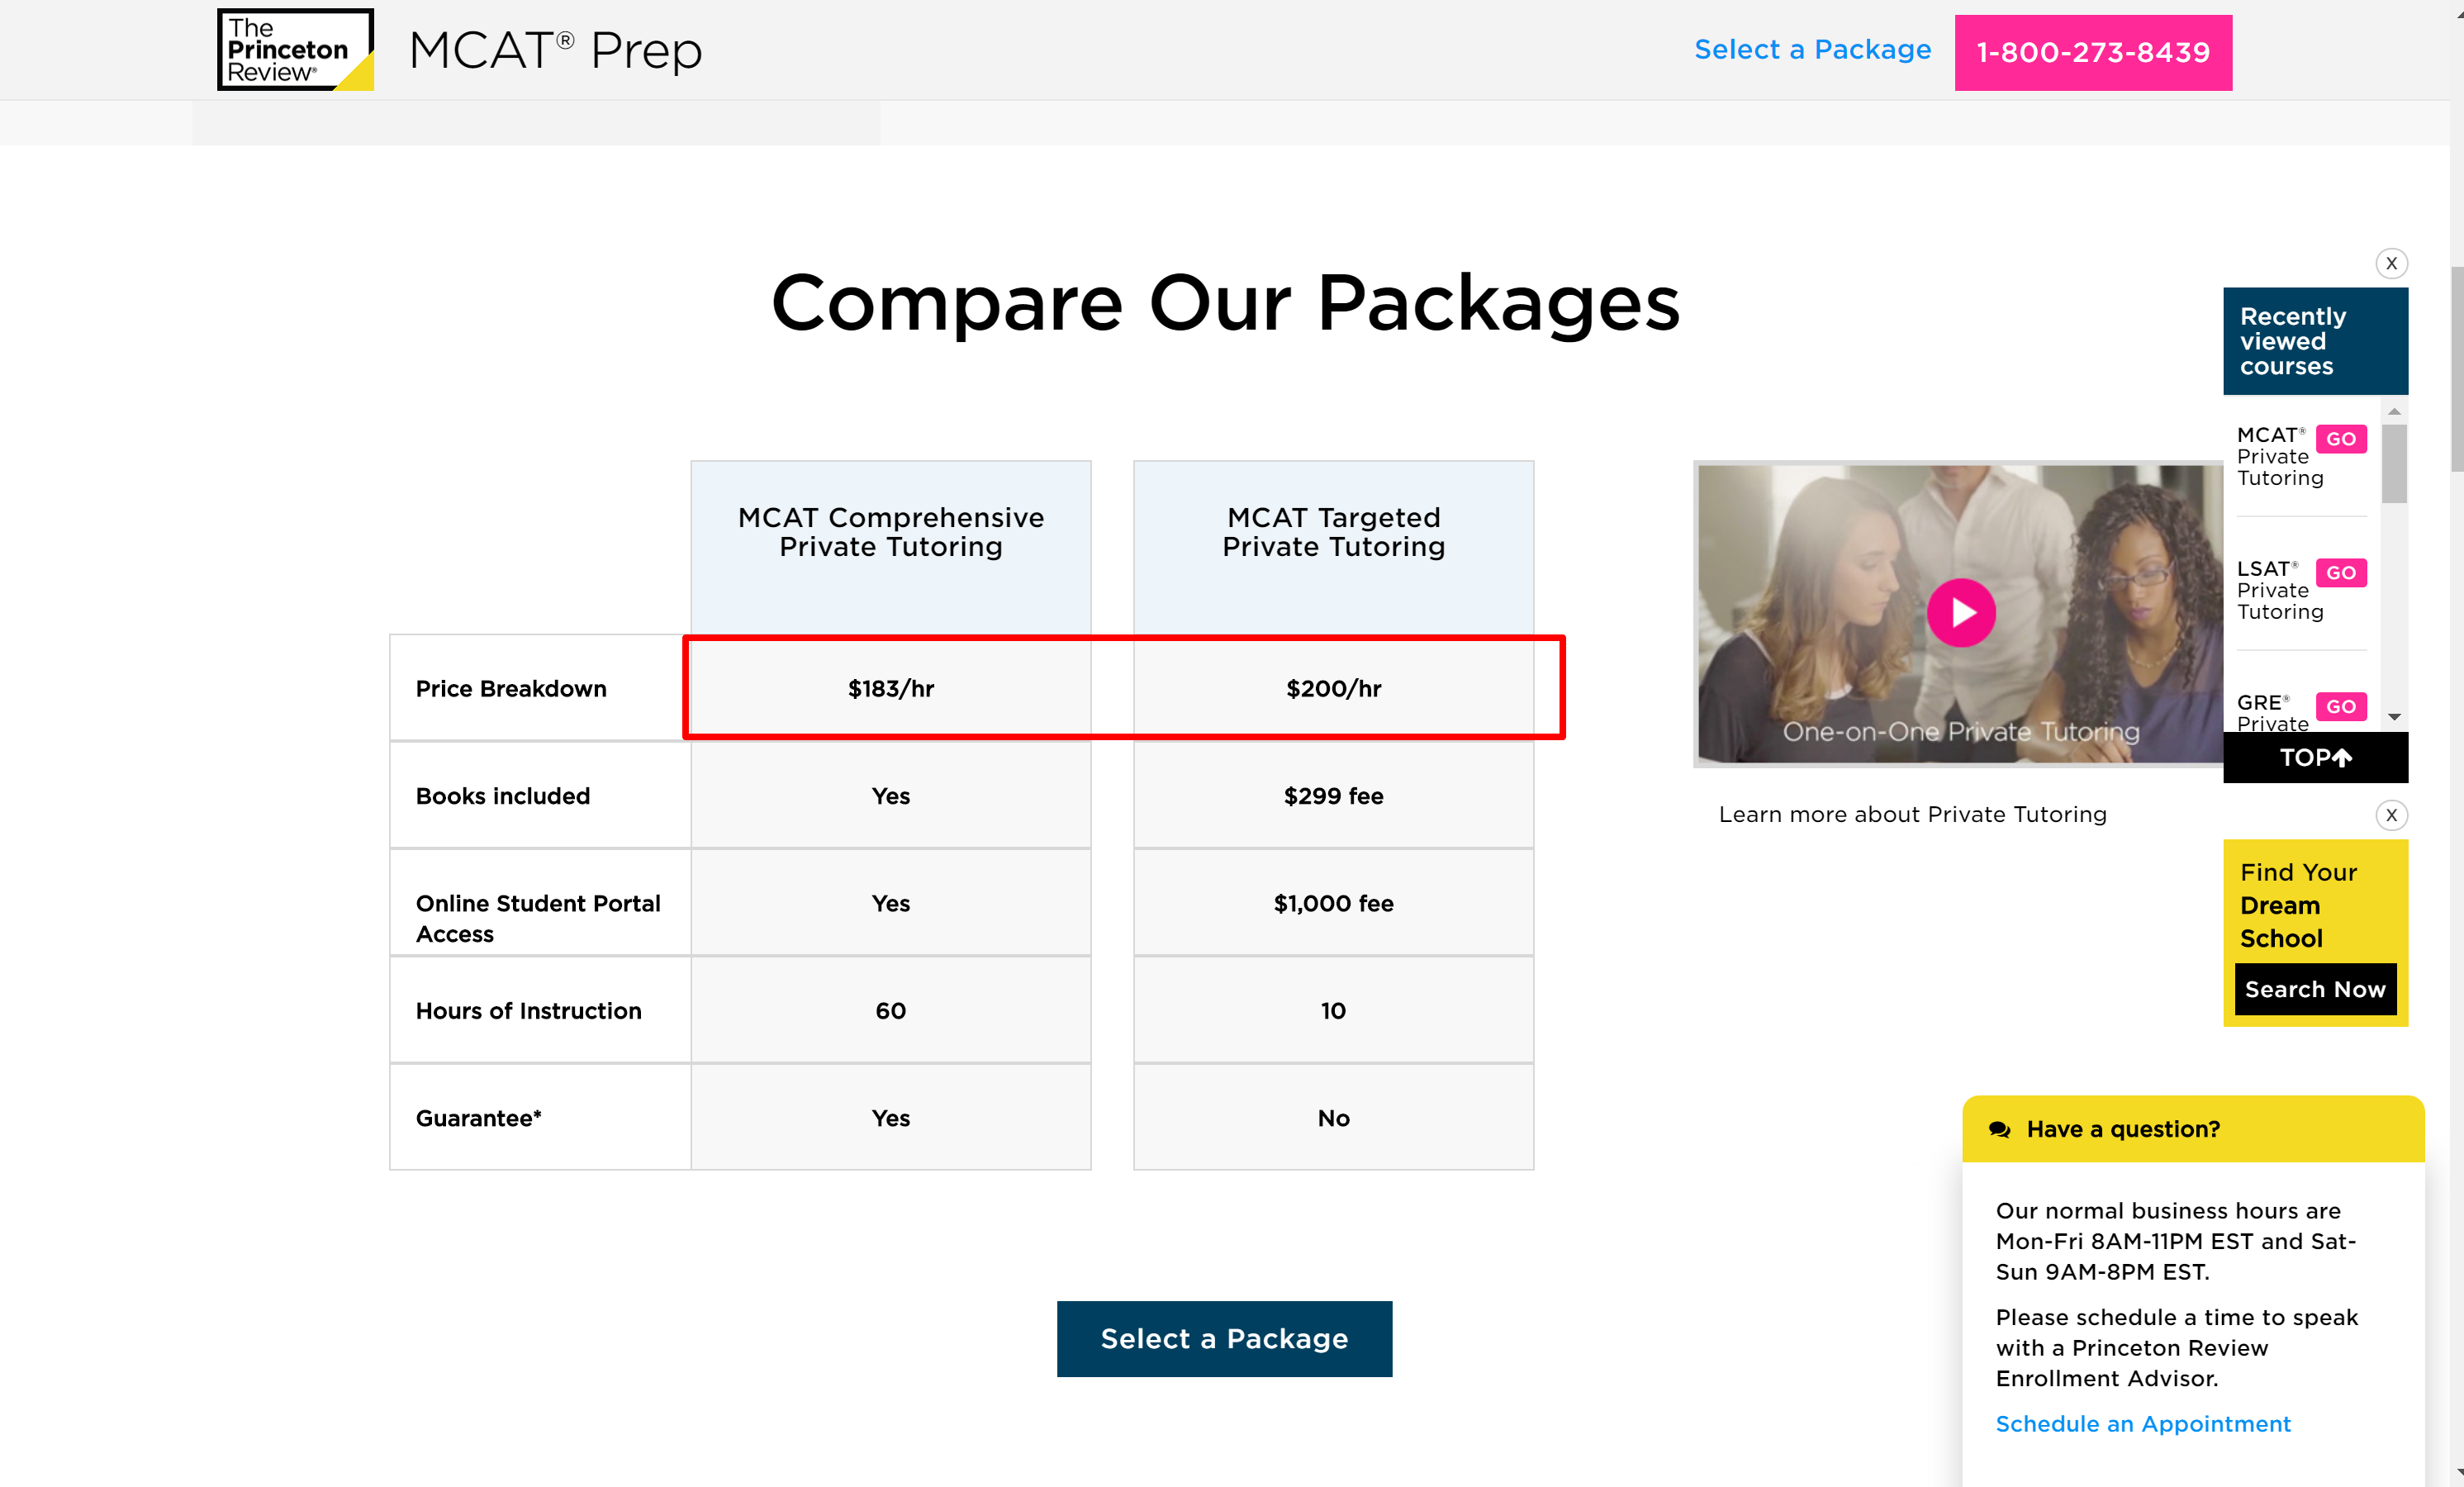 The princeton review pricing for MCAT